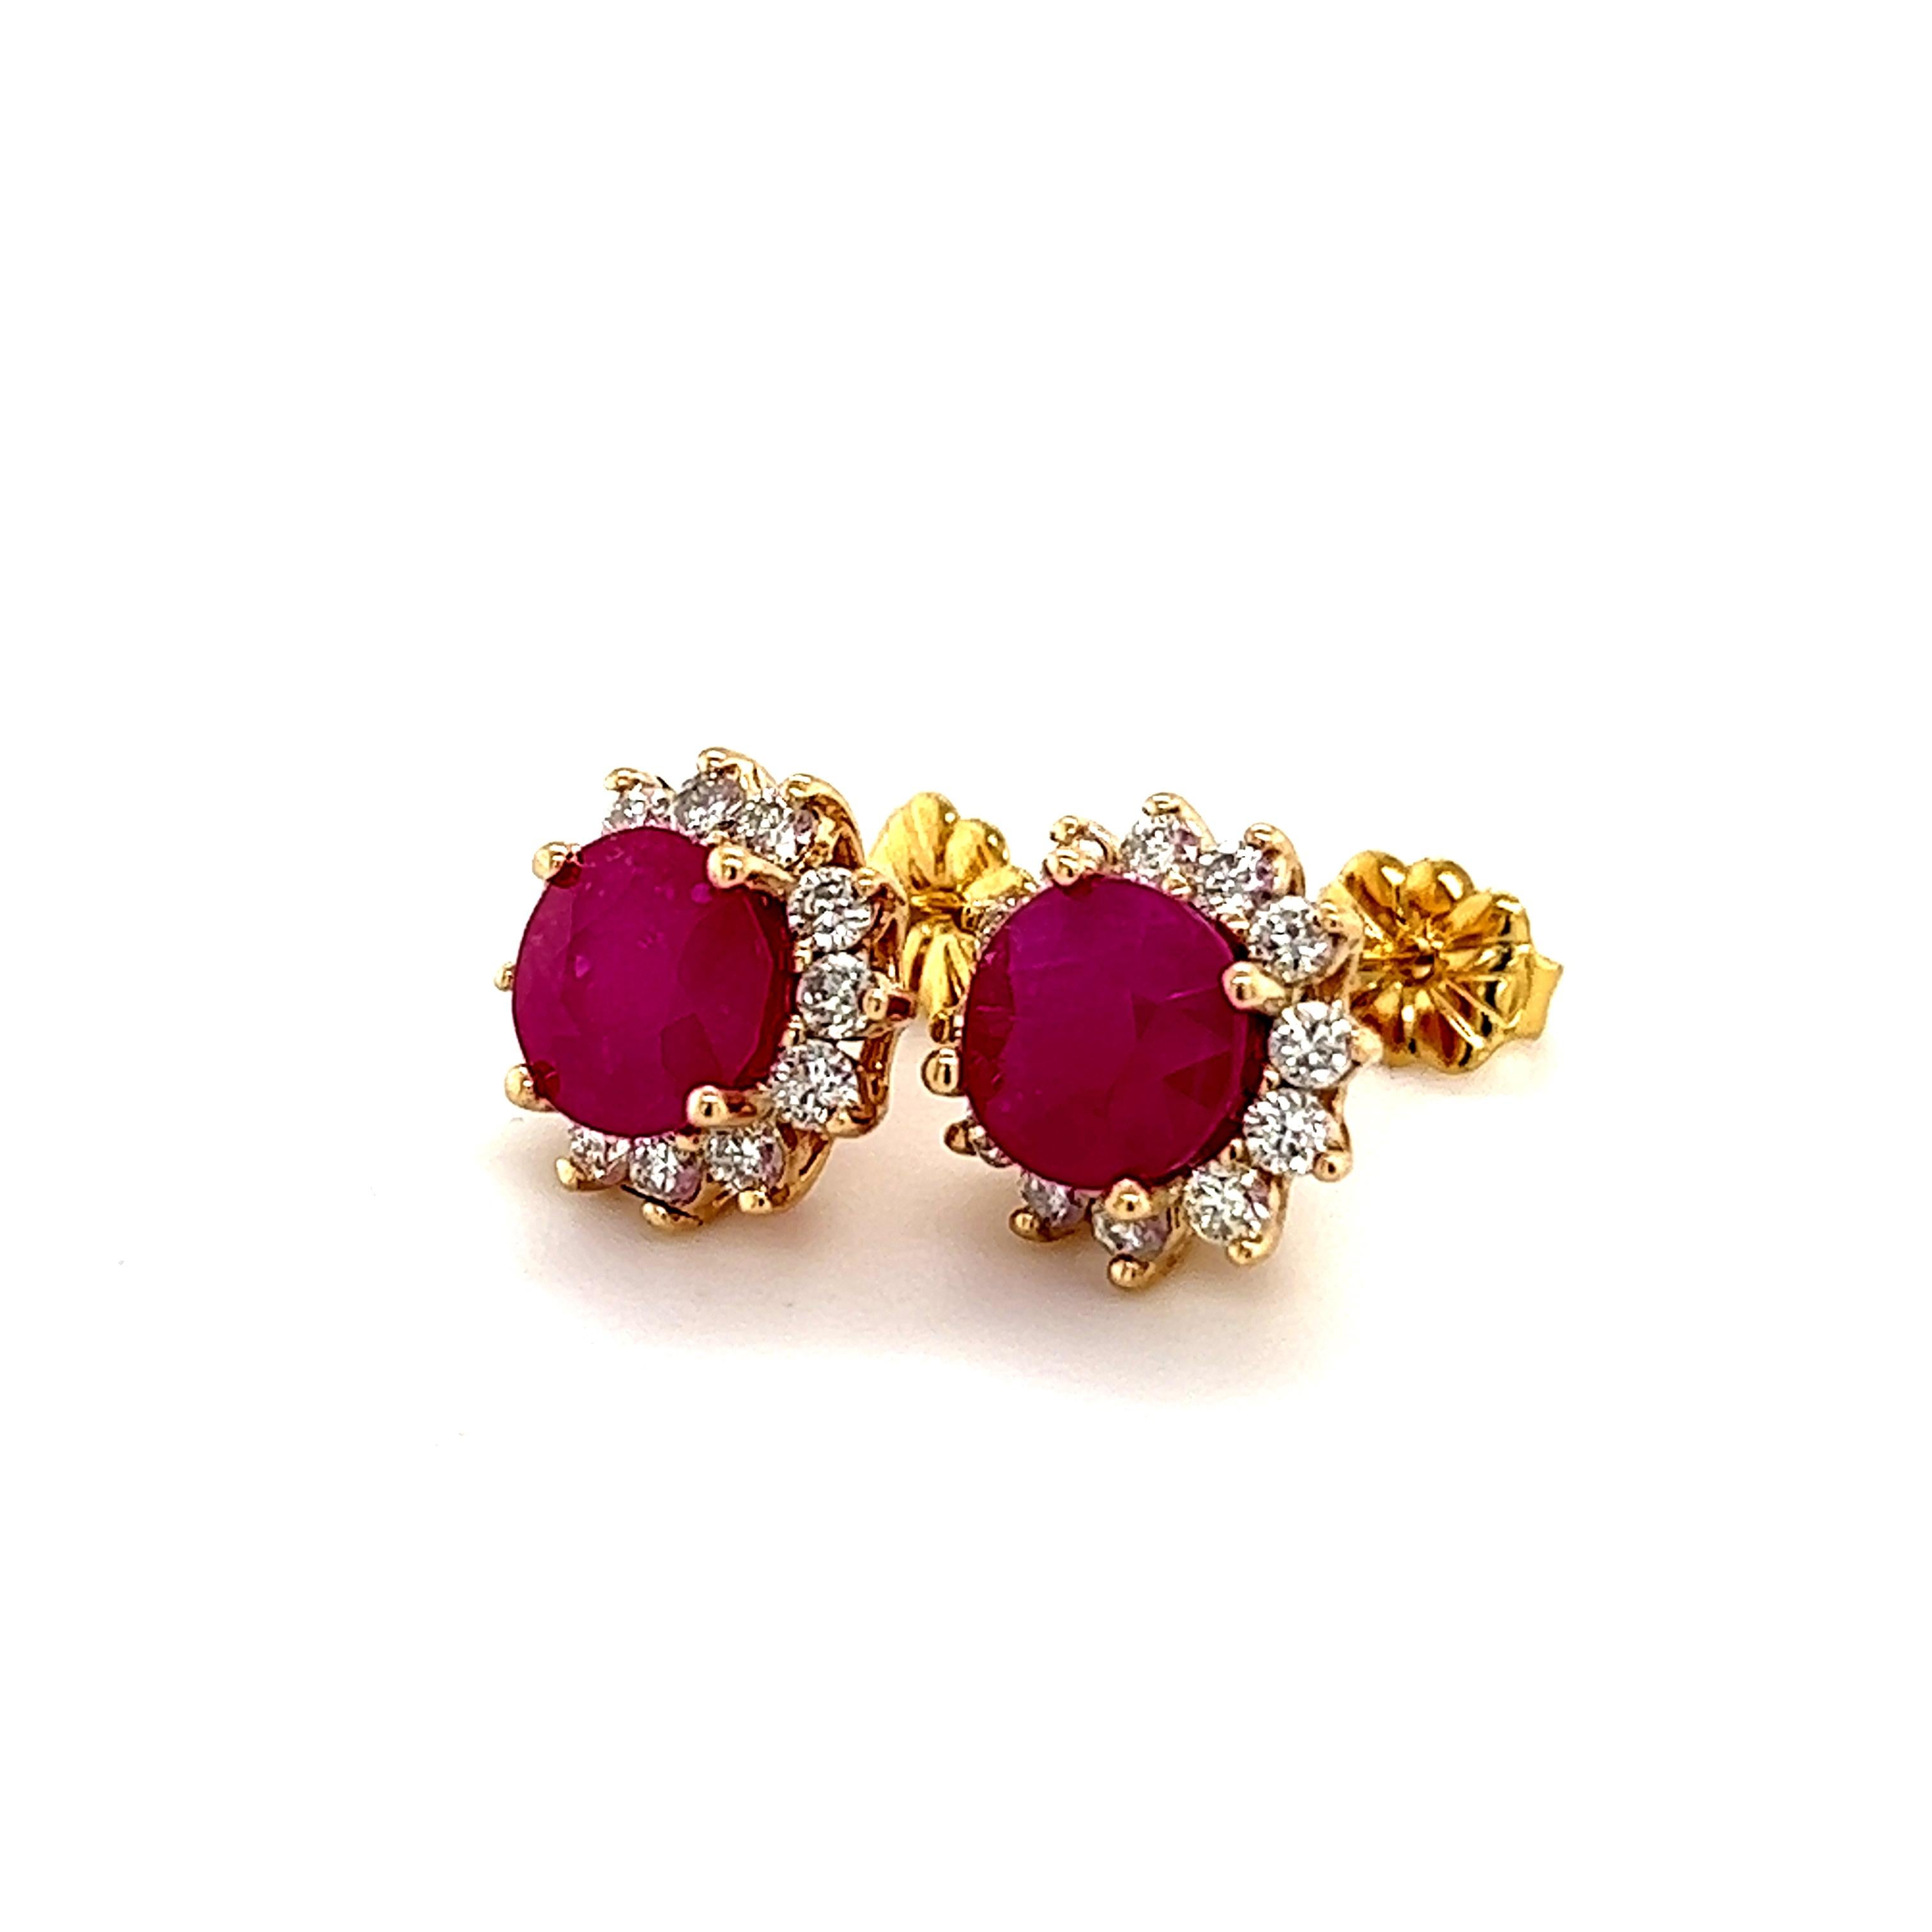 Natural Ruby Diamond Earrings 14k Gold 3.72 TCW Certified For Sale 6